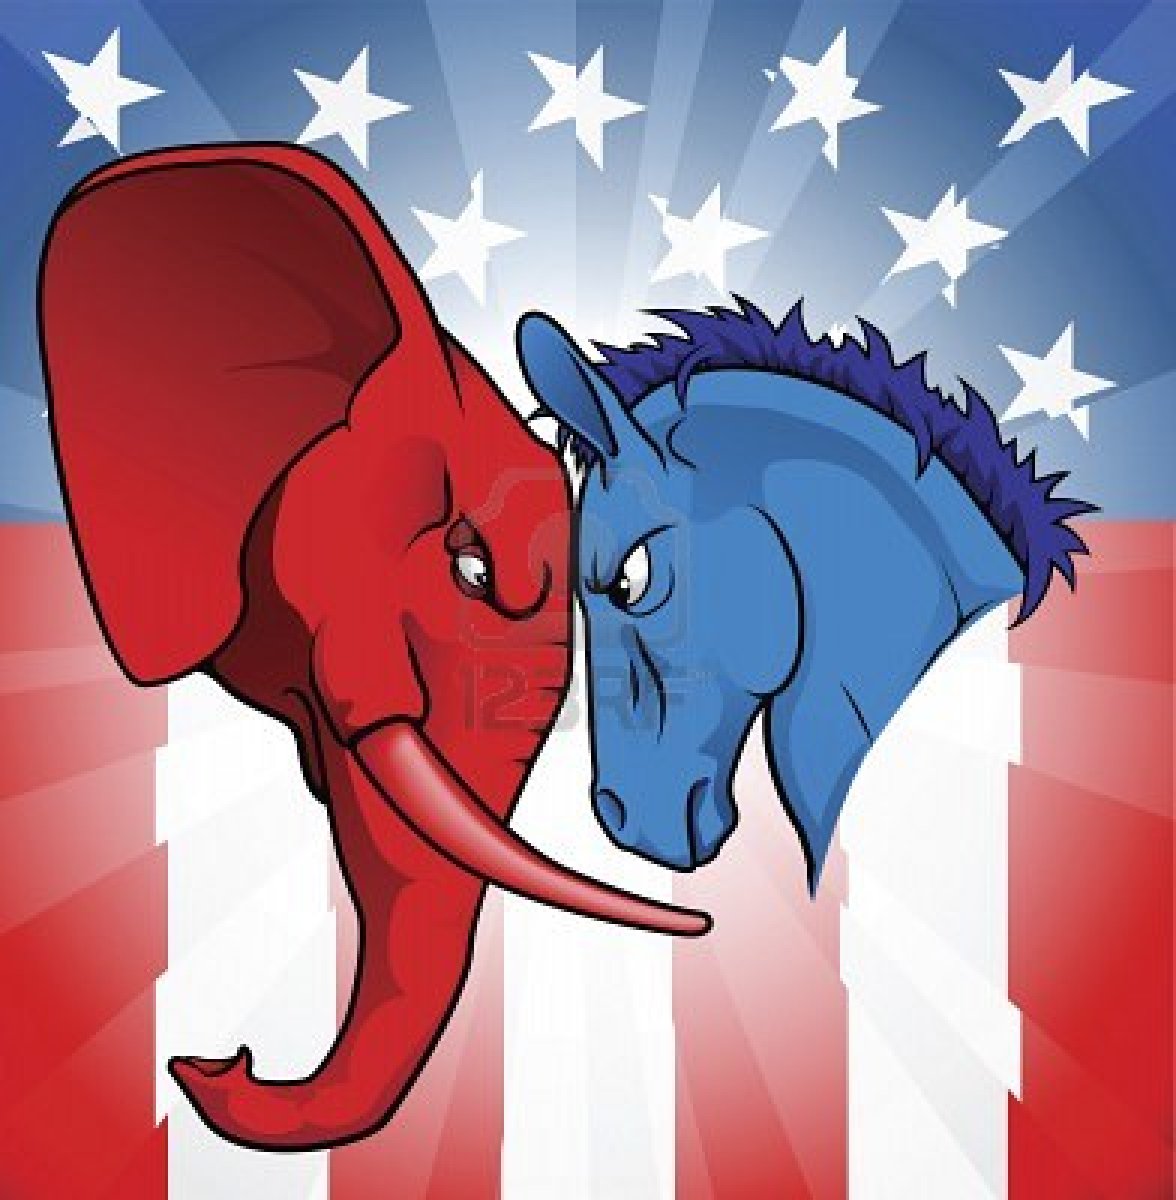 9326220 The Democrat And Republican Symbols Of A Donkey And Elephant